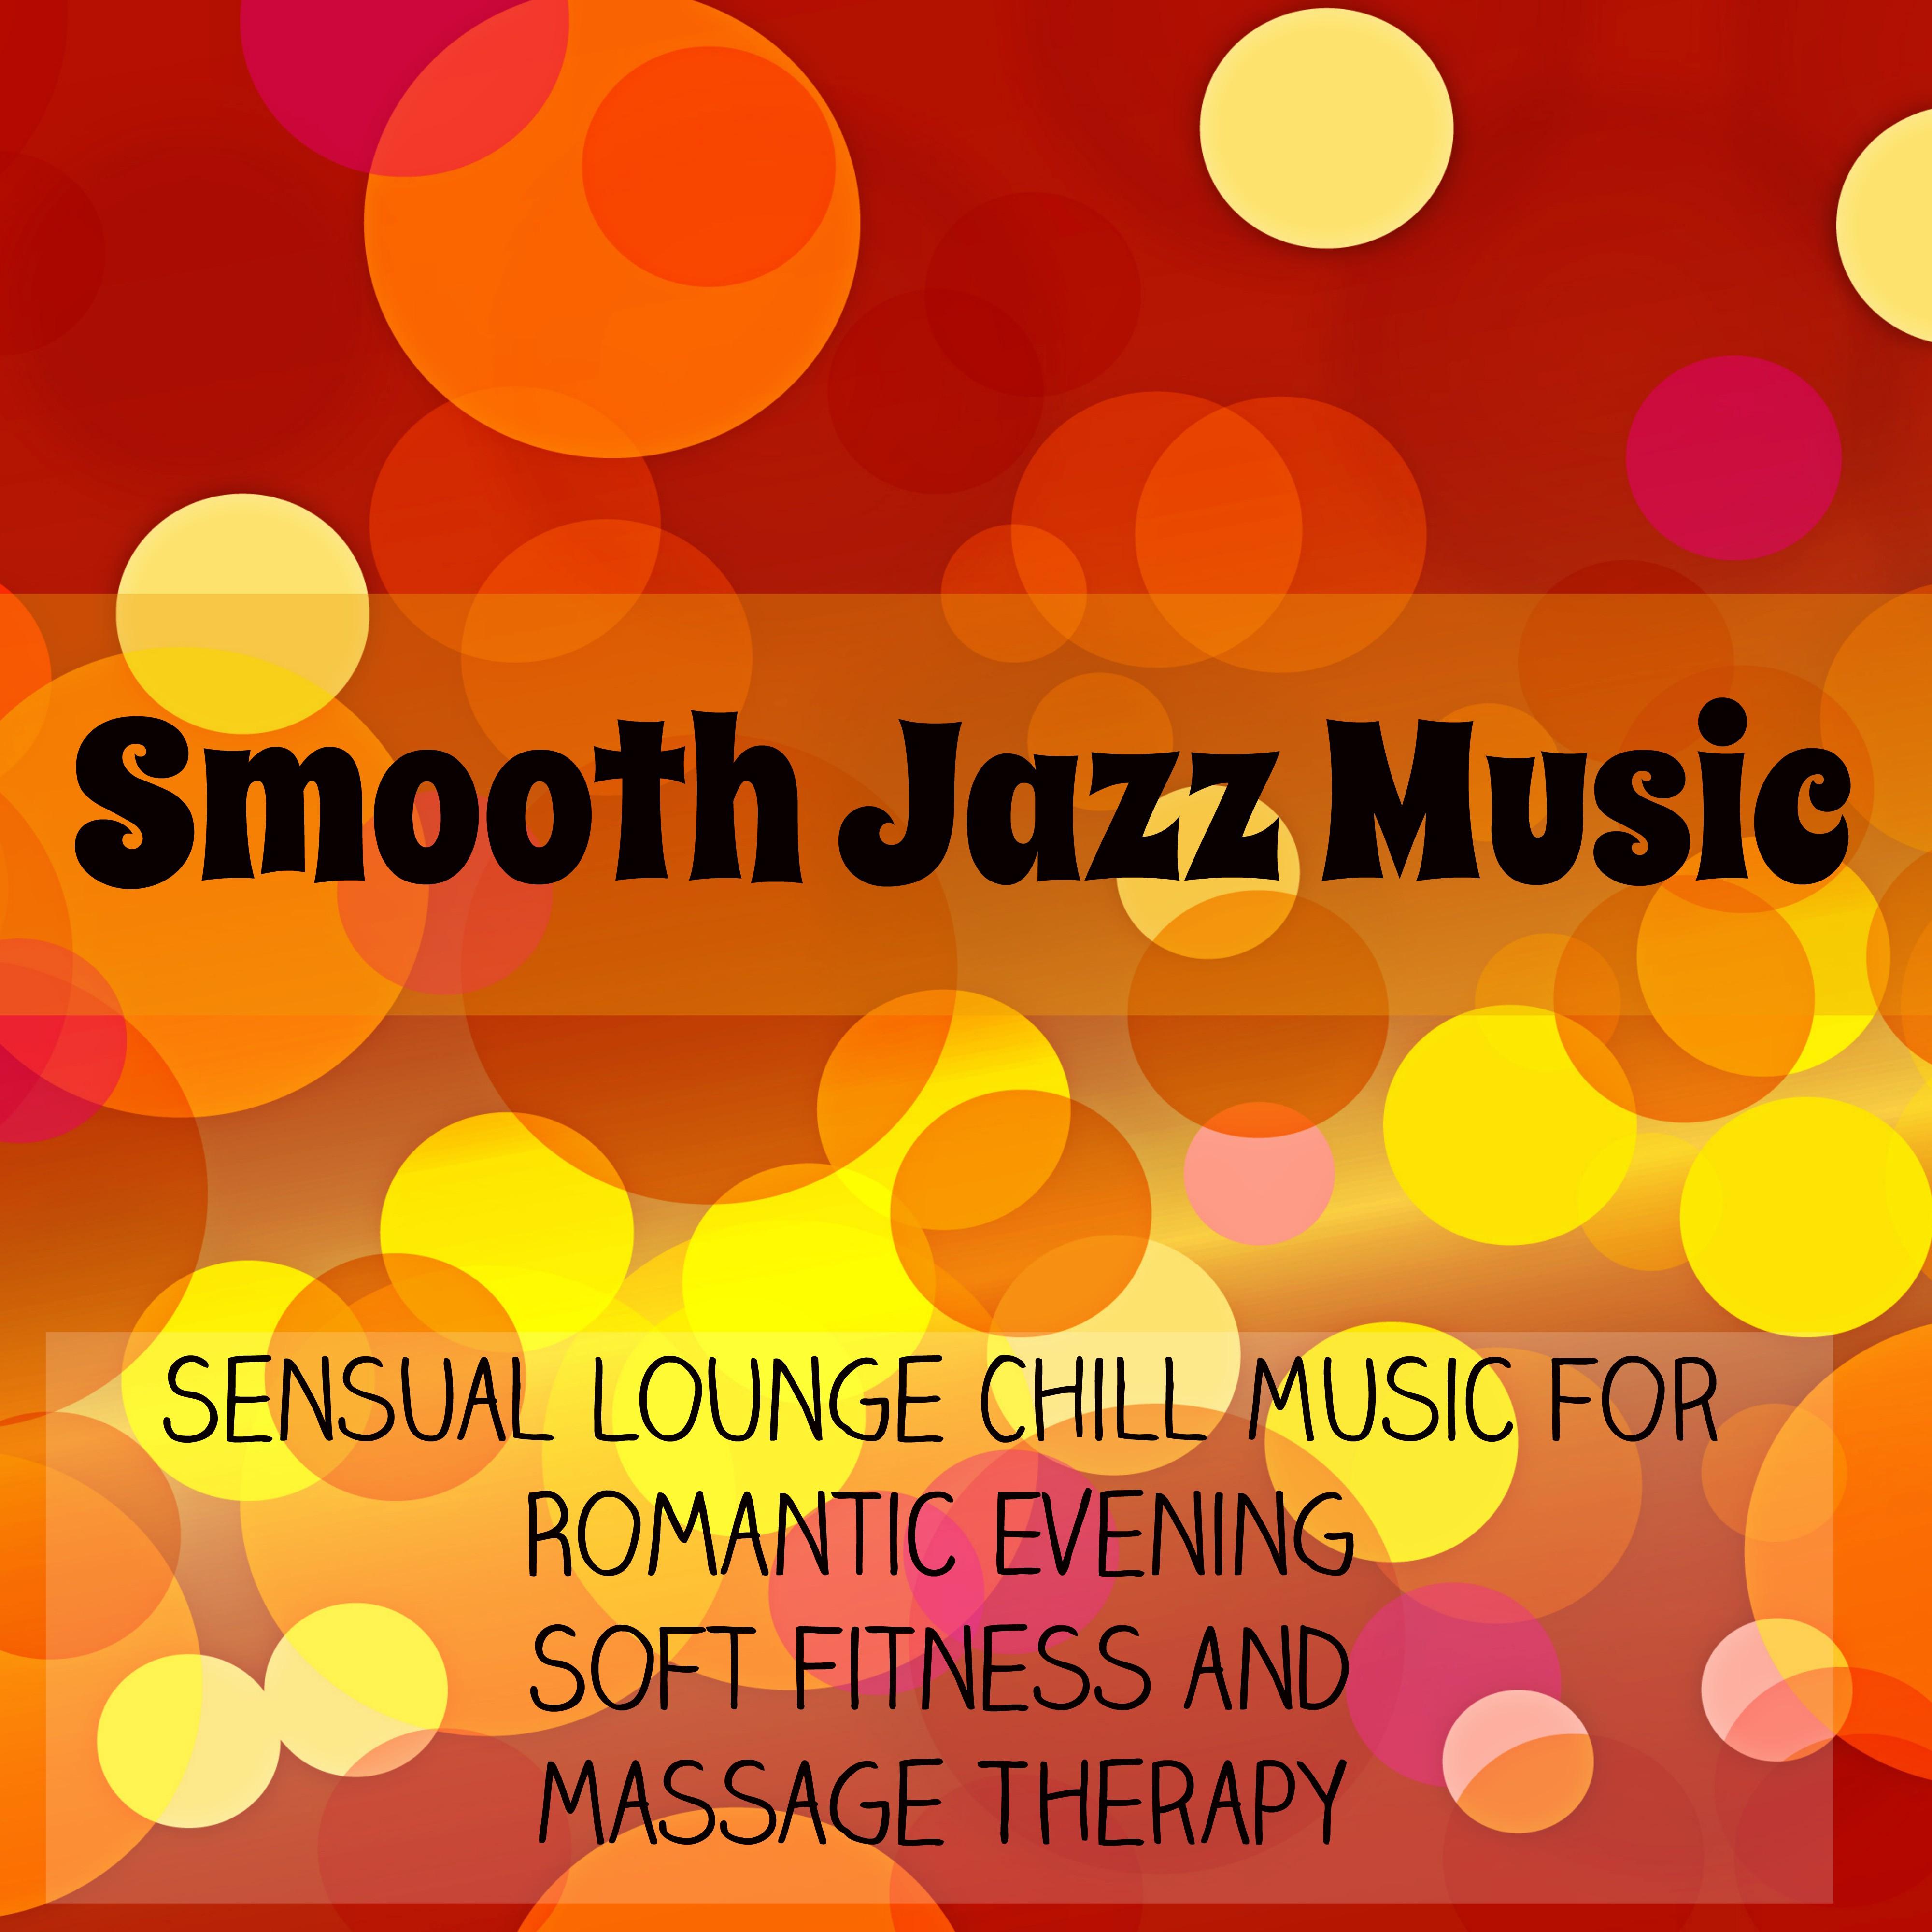 Smooth Jazz Music - Sensual Lounge Chillout Music for Romantic Evening Soft Fitness and Massage Therapy